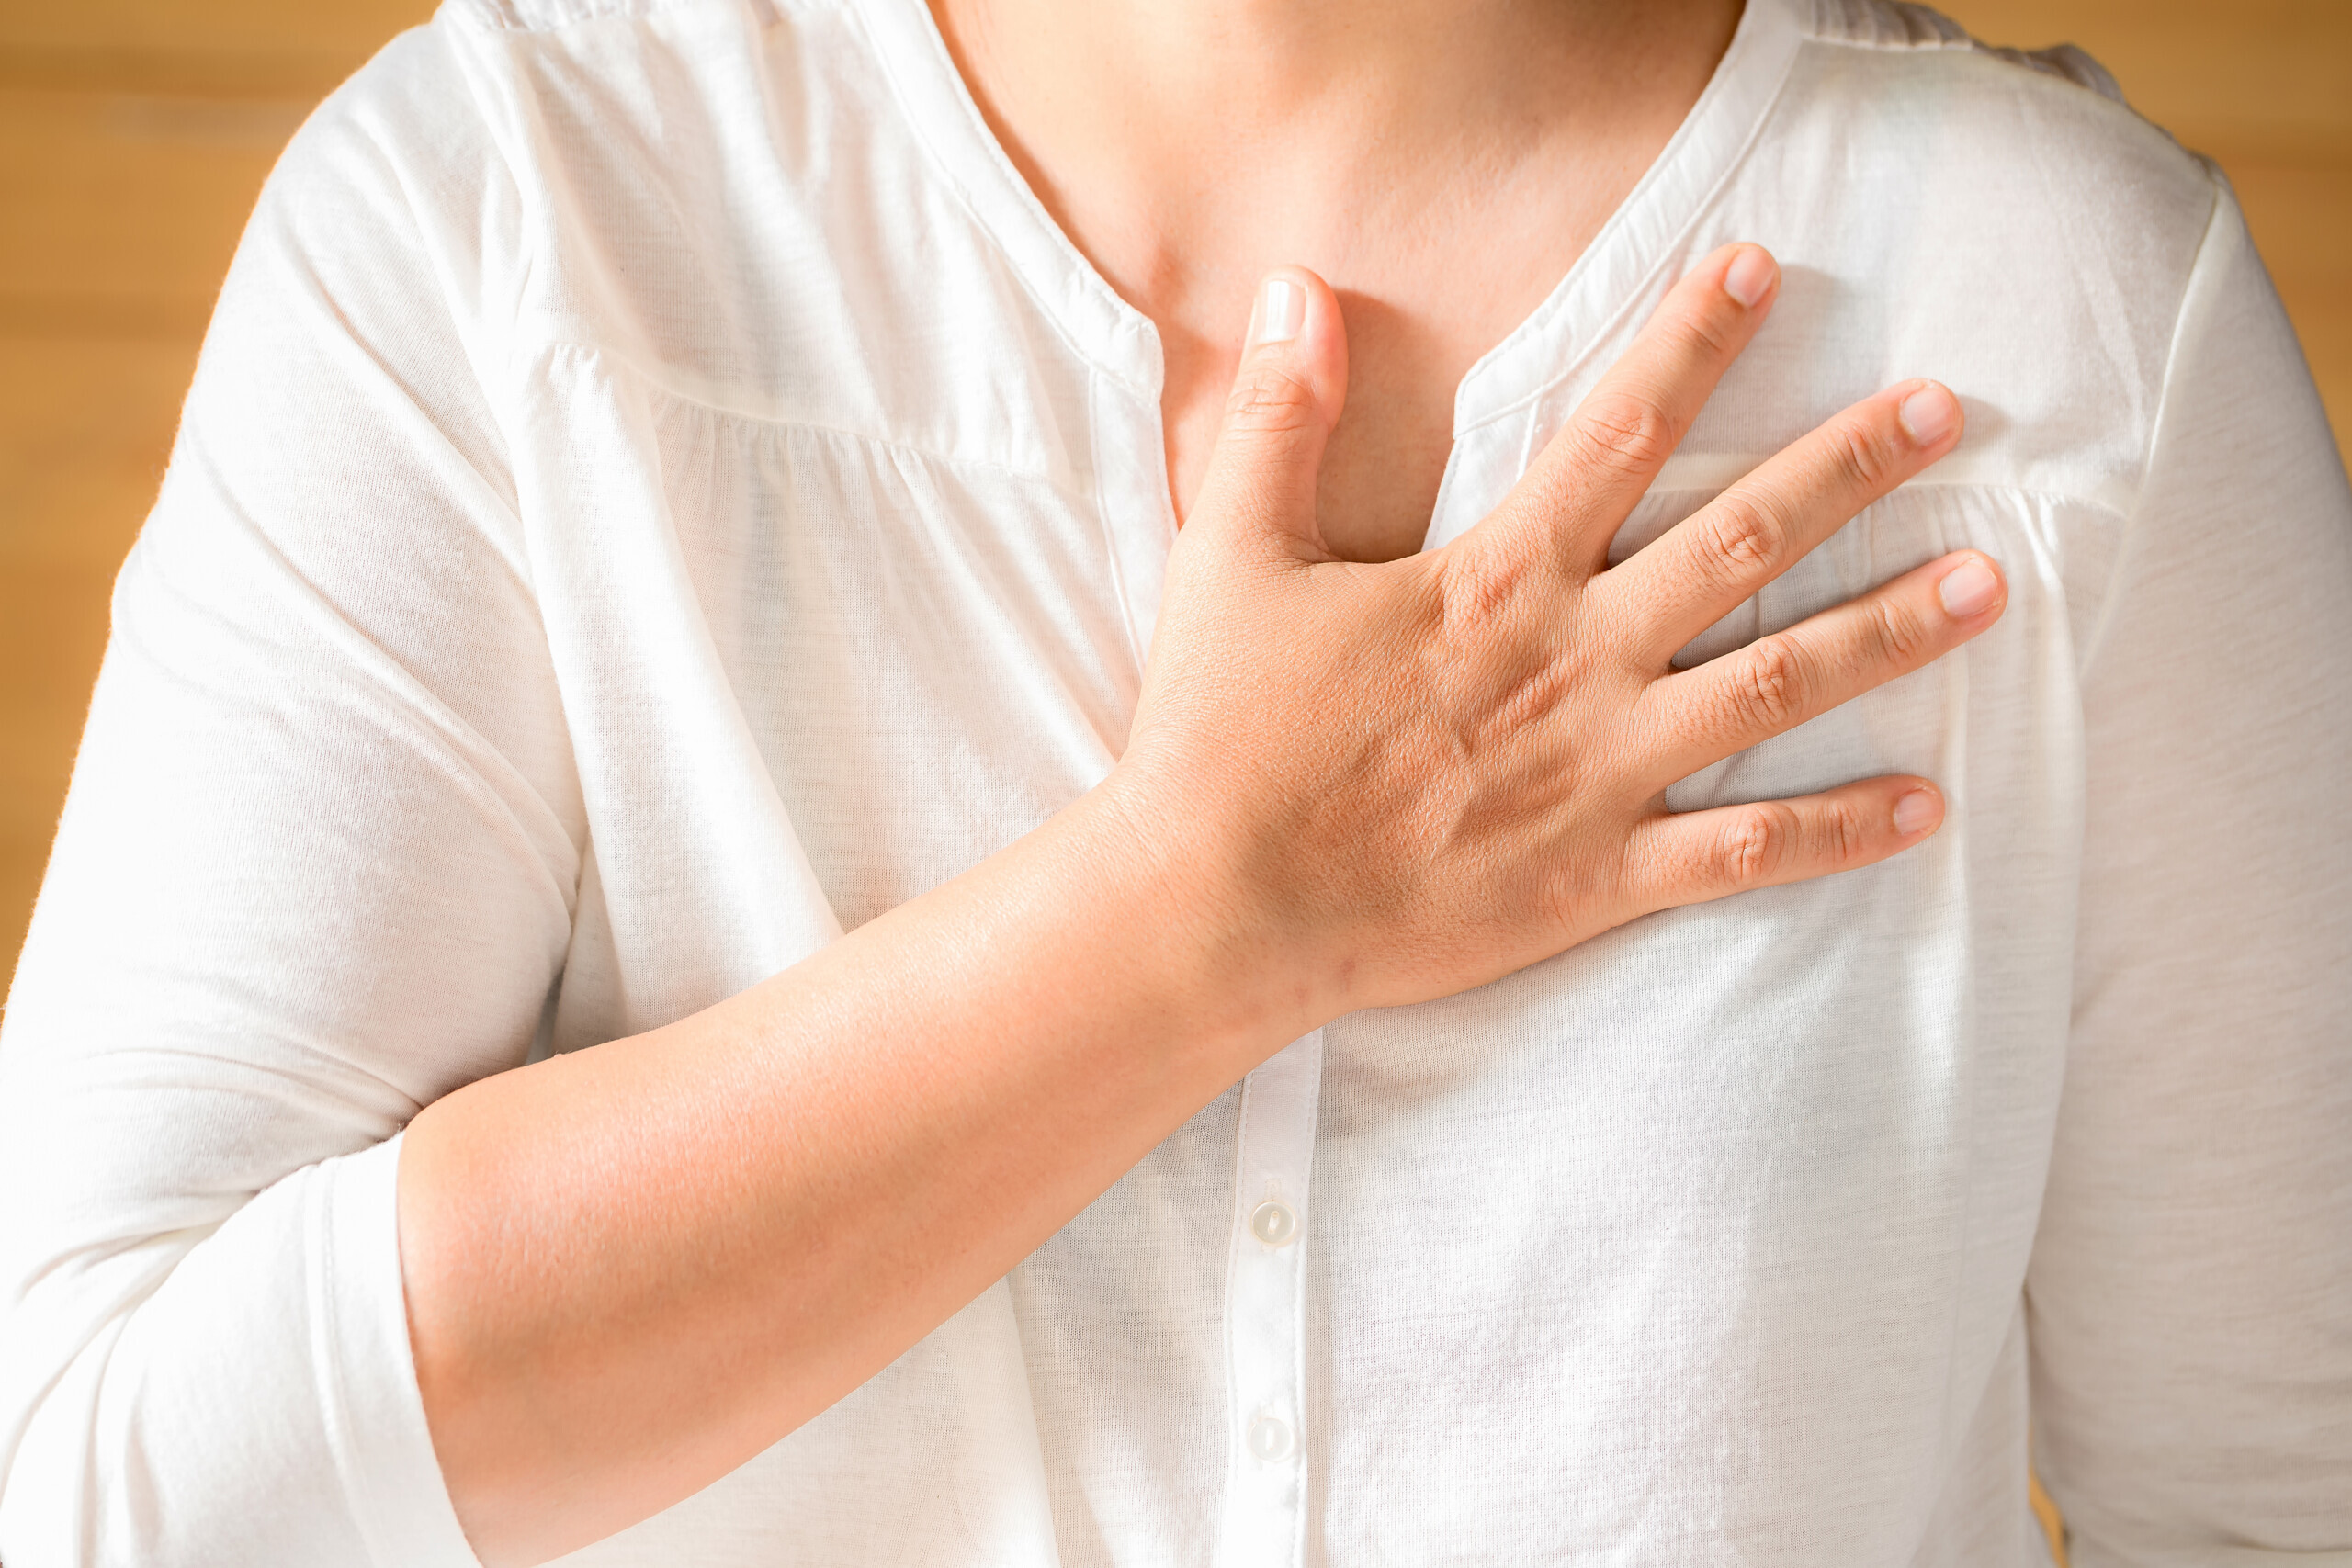 Chest Pain & Shortness of Breath: When to Visit ER